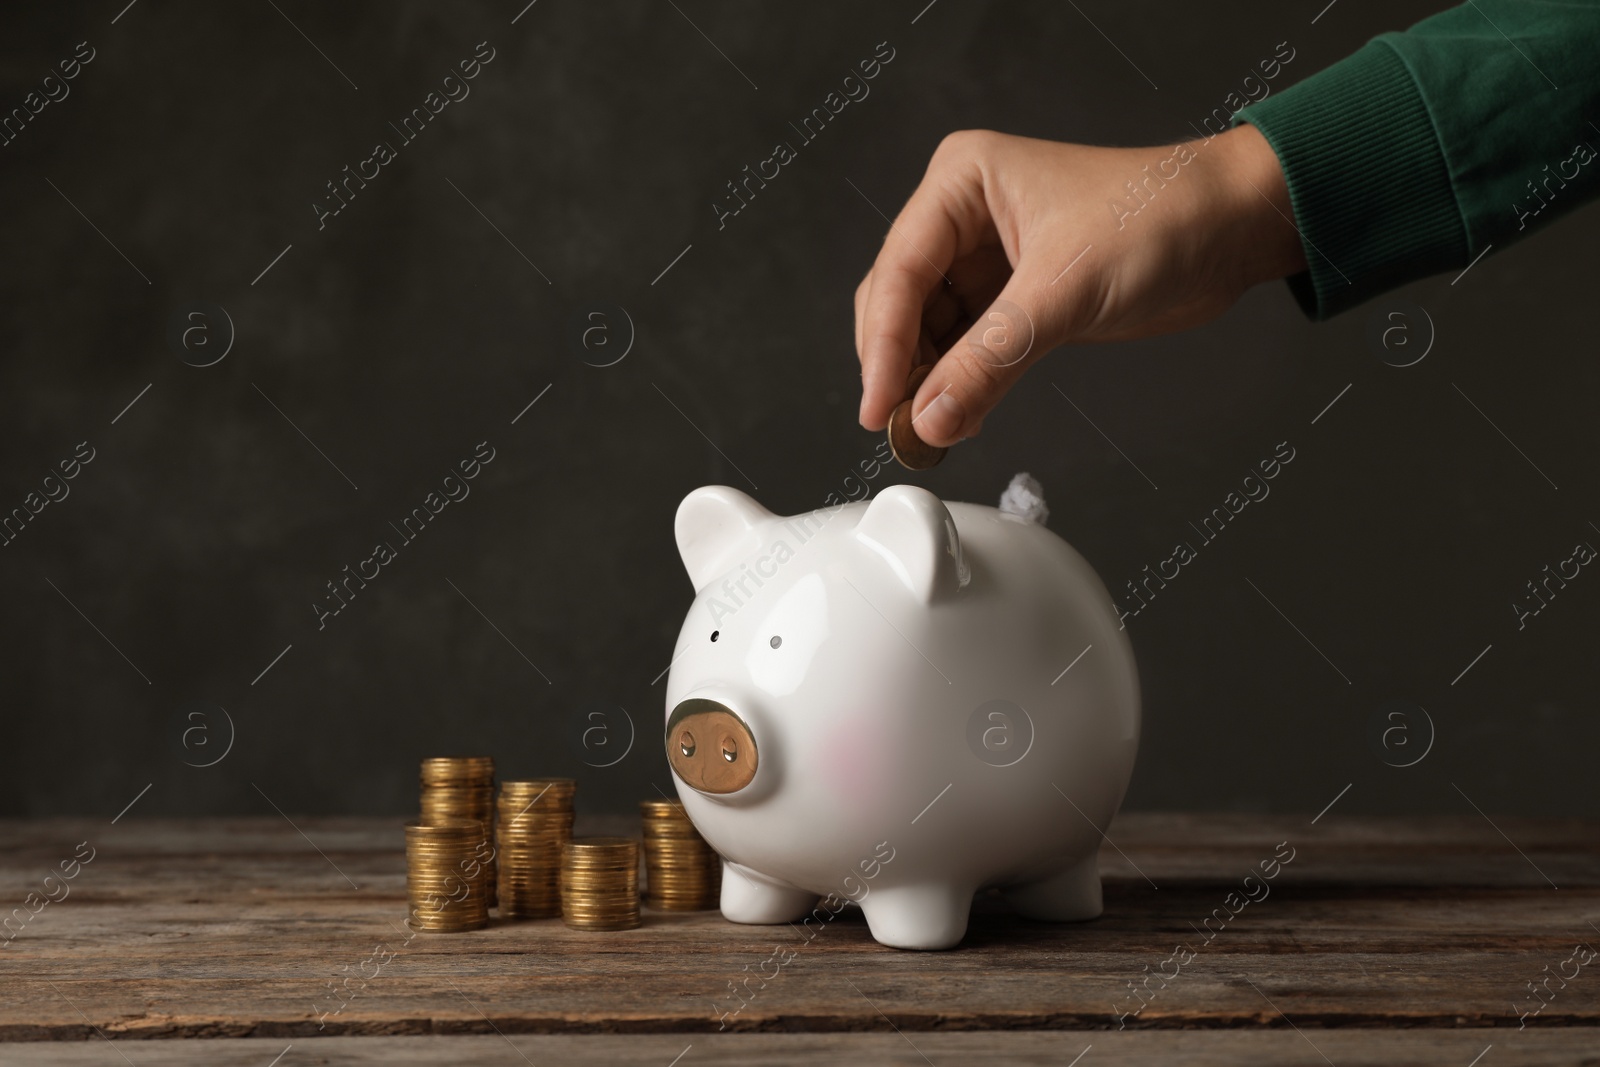 Photo of Woman putting coin into piggy bank on table against dark background